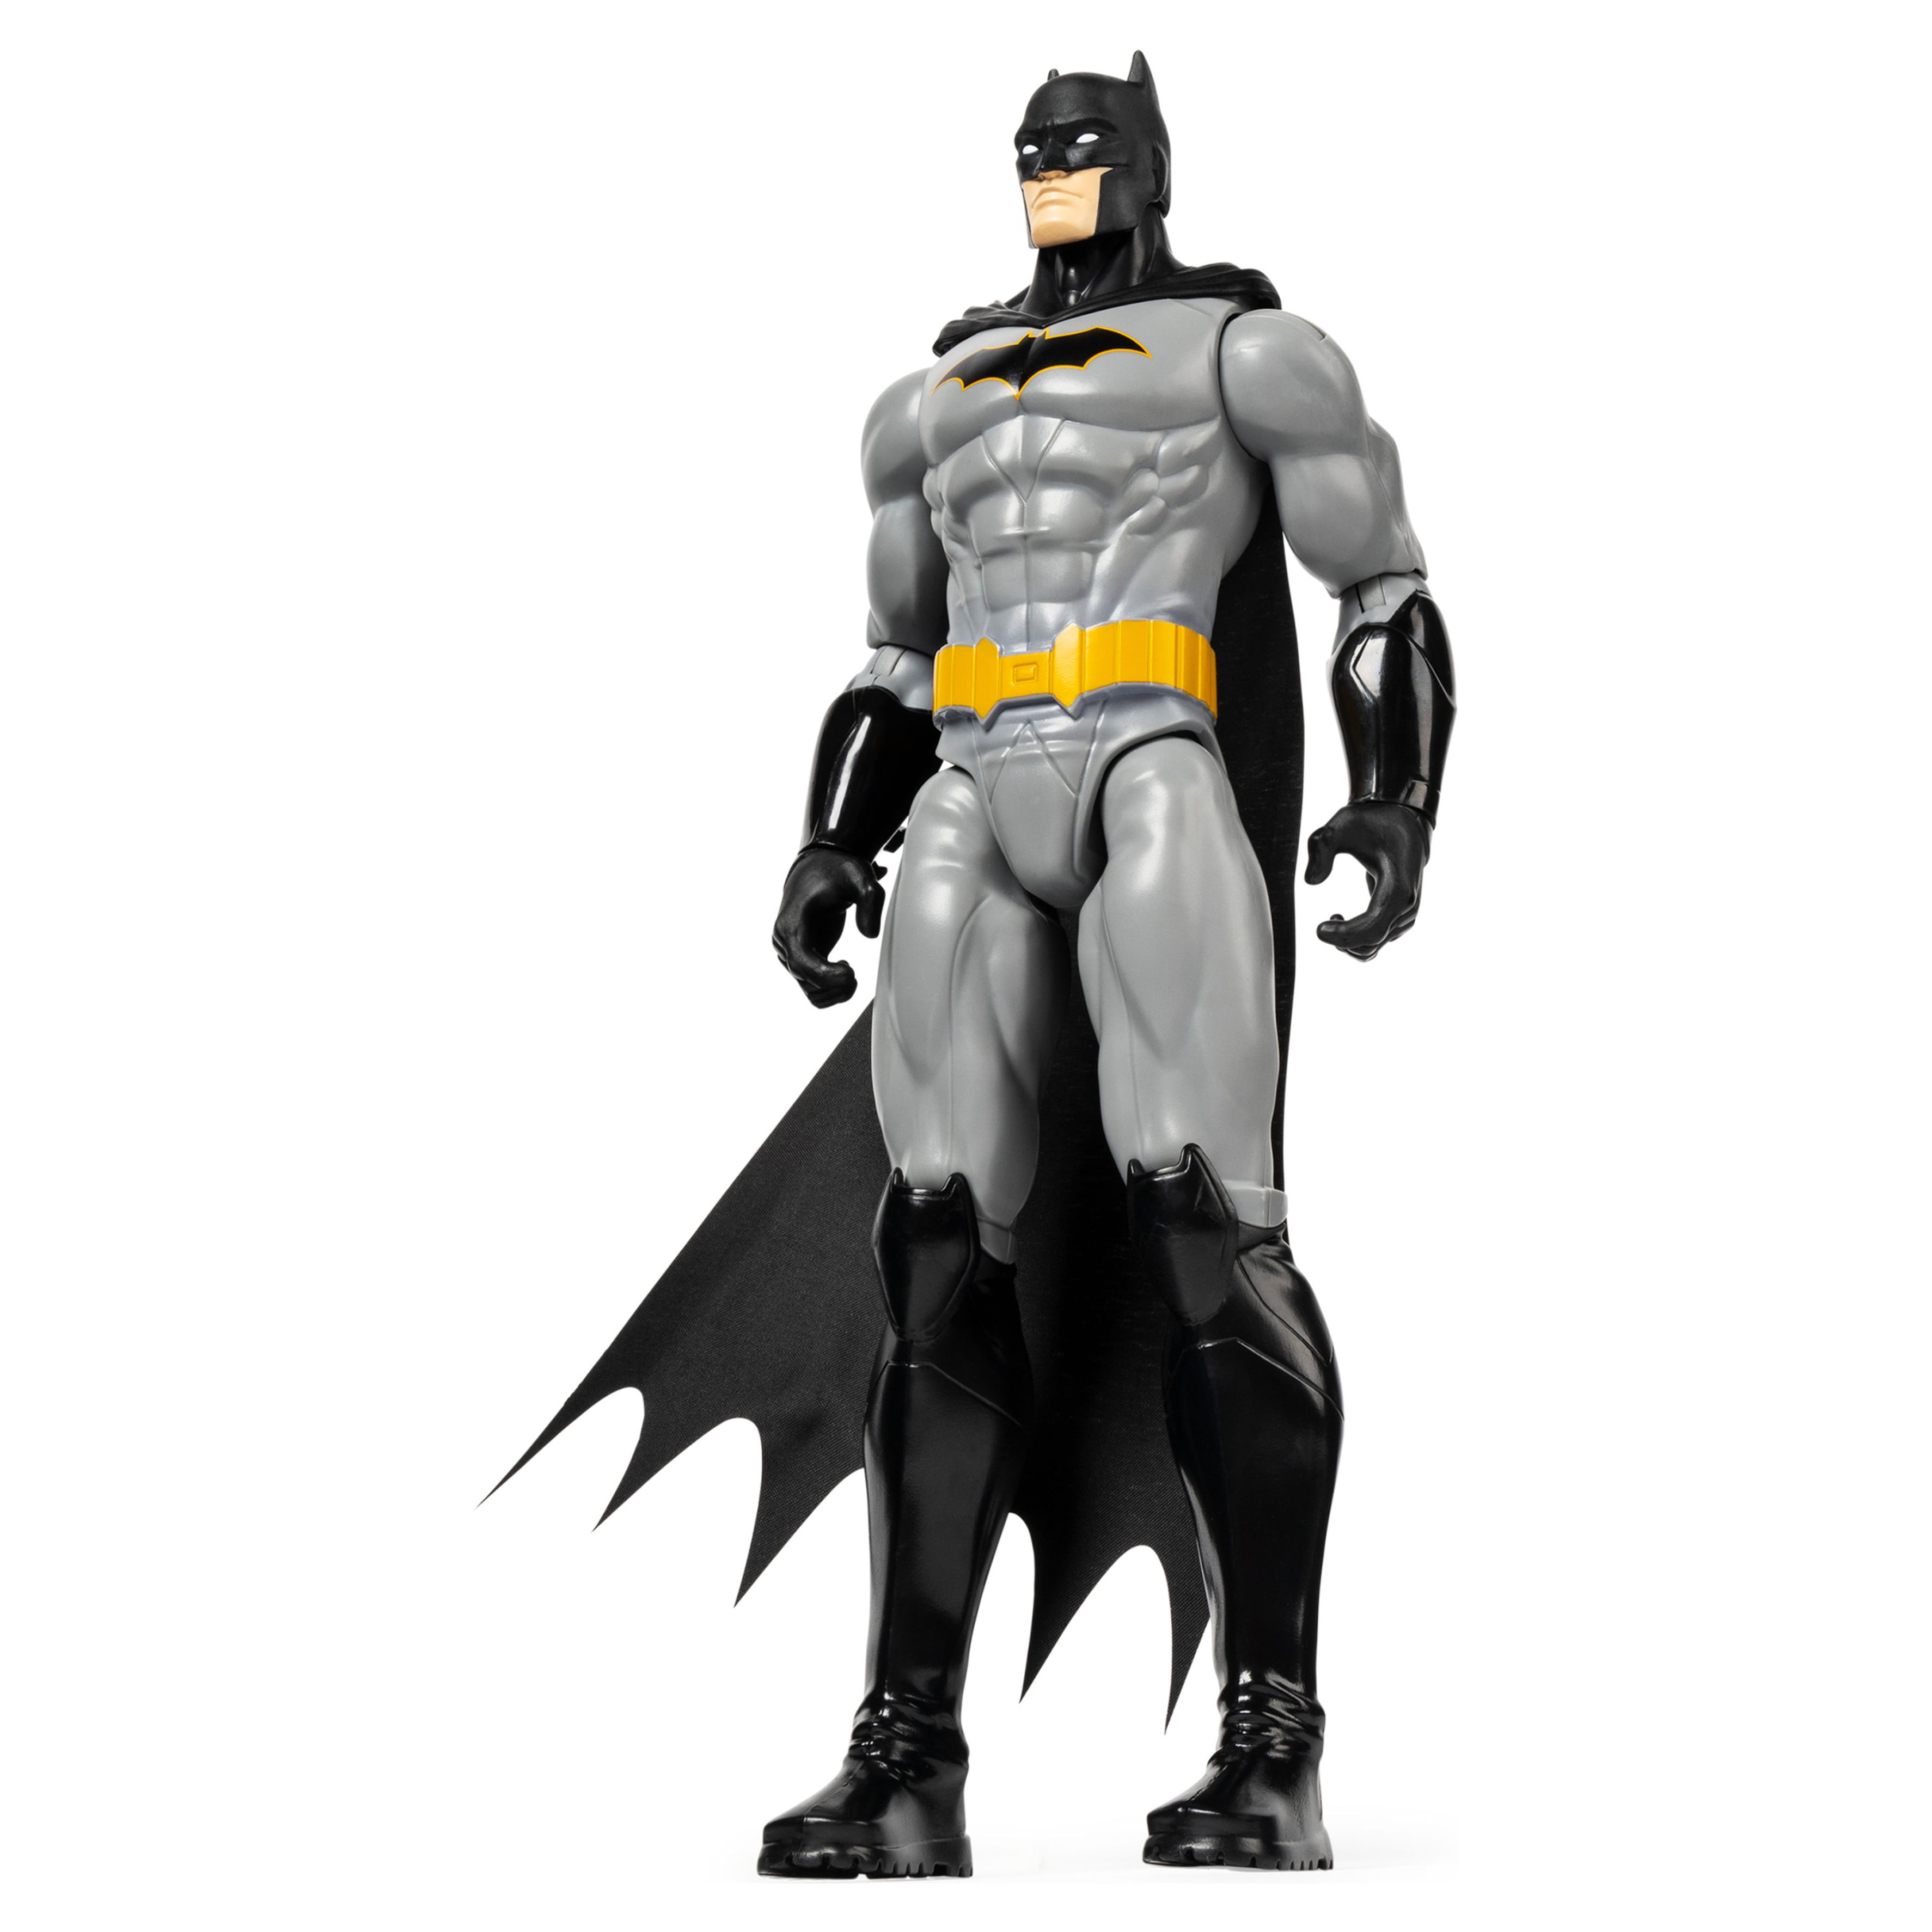 Batman 12-inch Rebirth Action Figure, Kids Toys for Boys Aged 3 and up - image 5 of 7